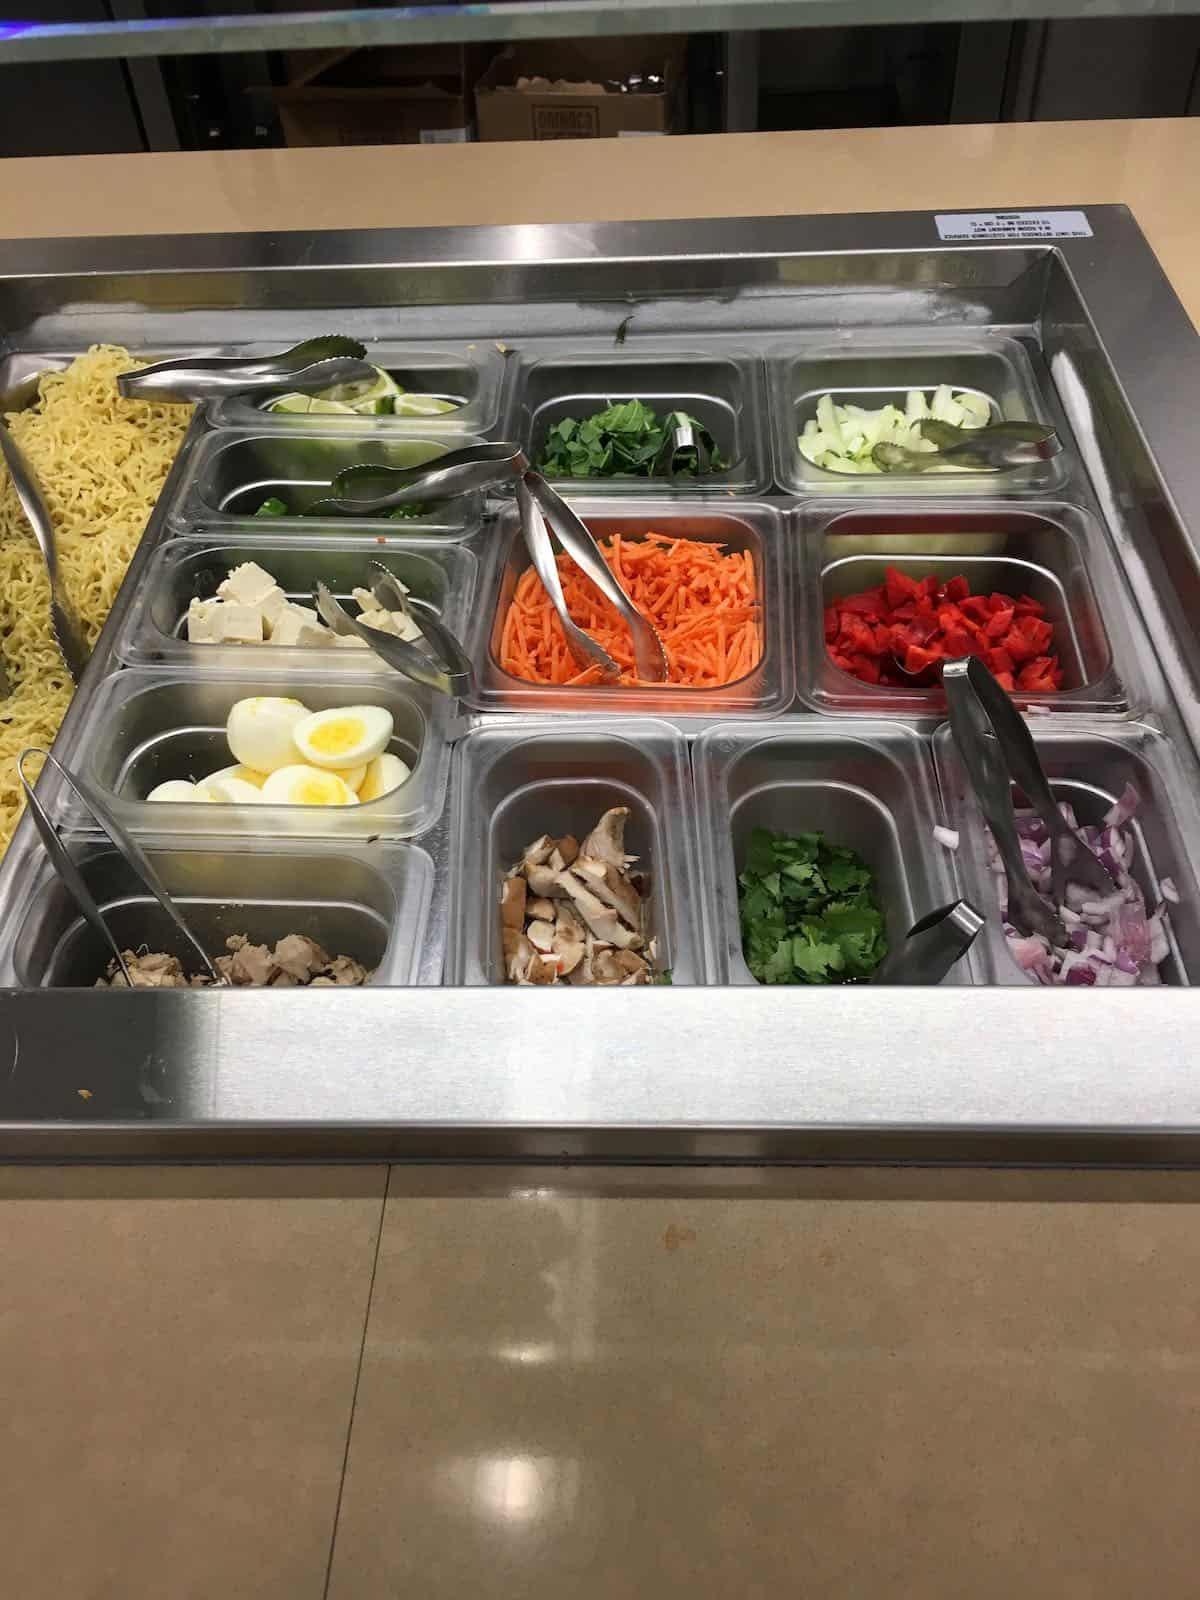 Choices of ingredients on noodle bar.